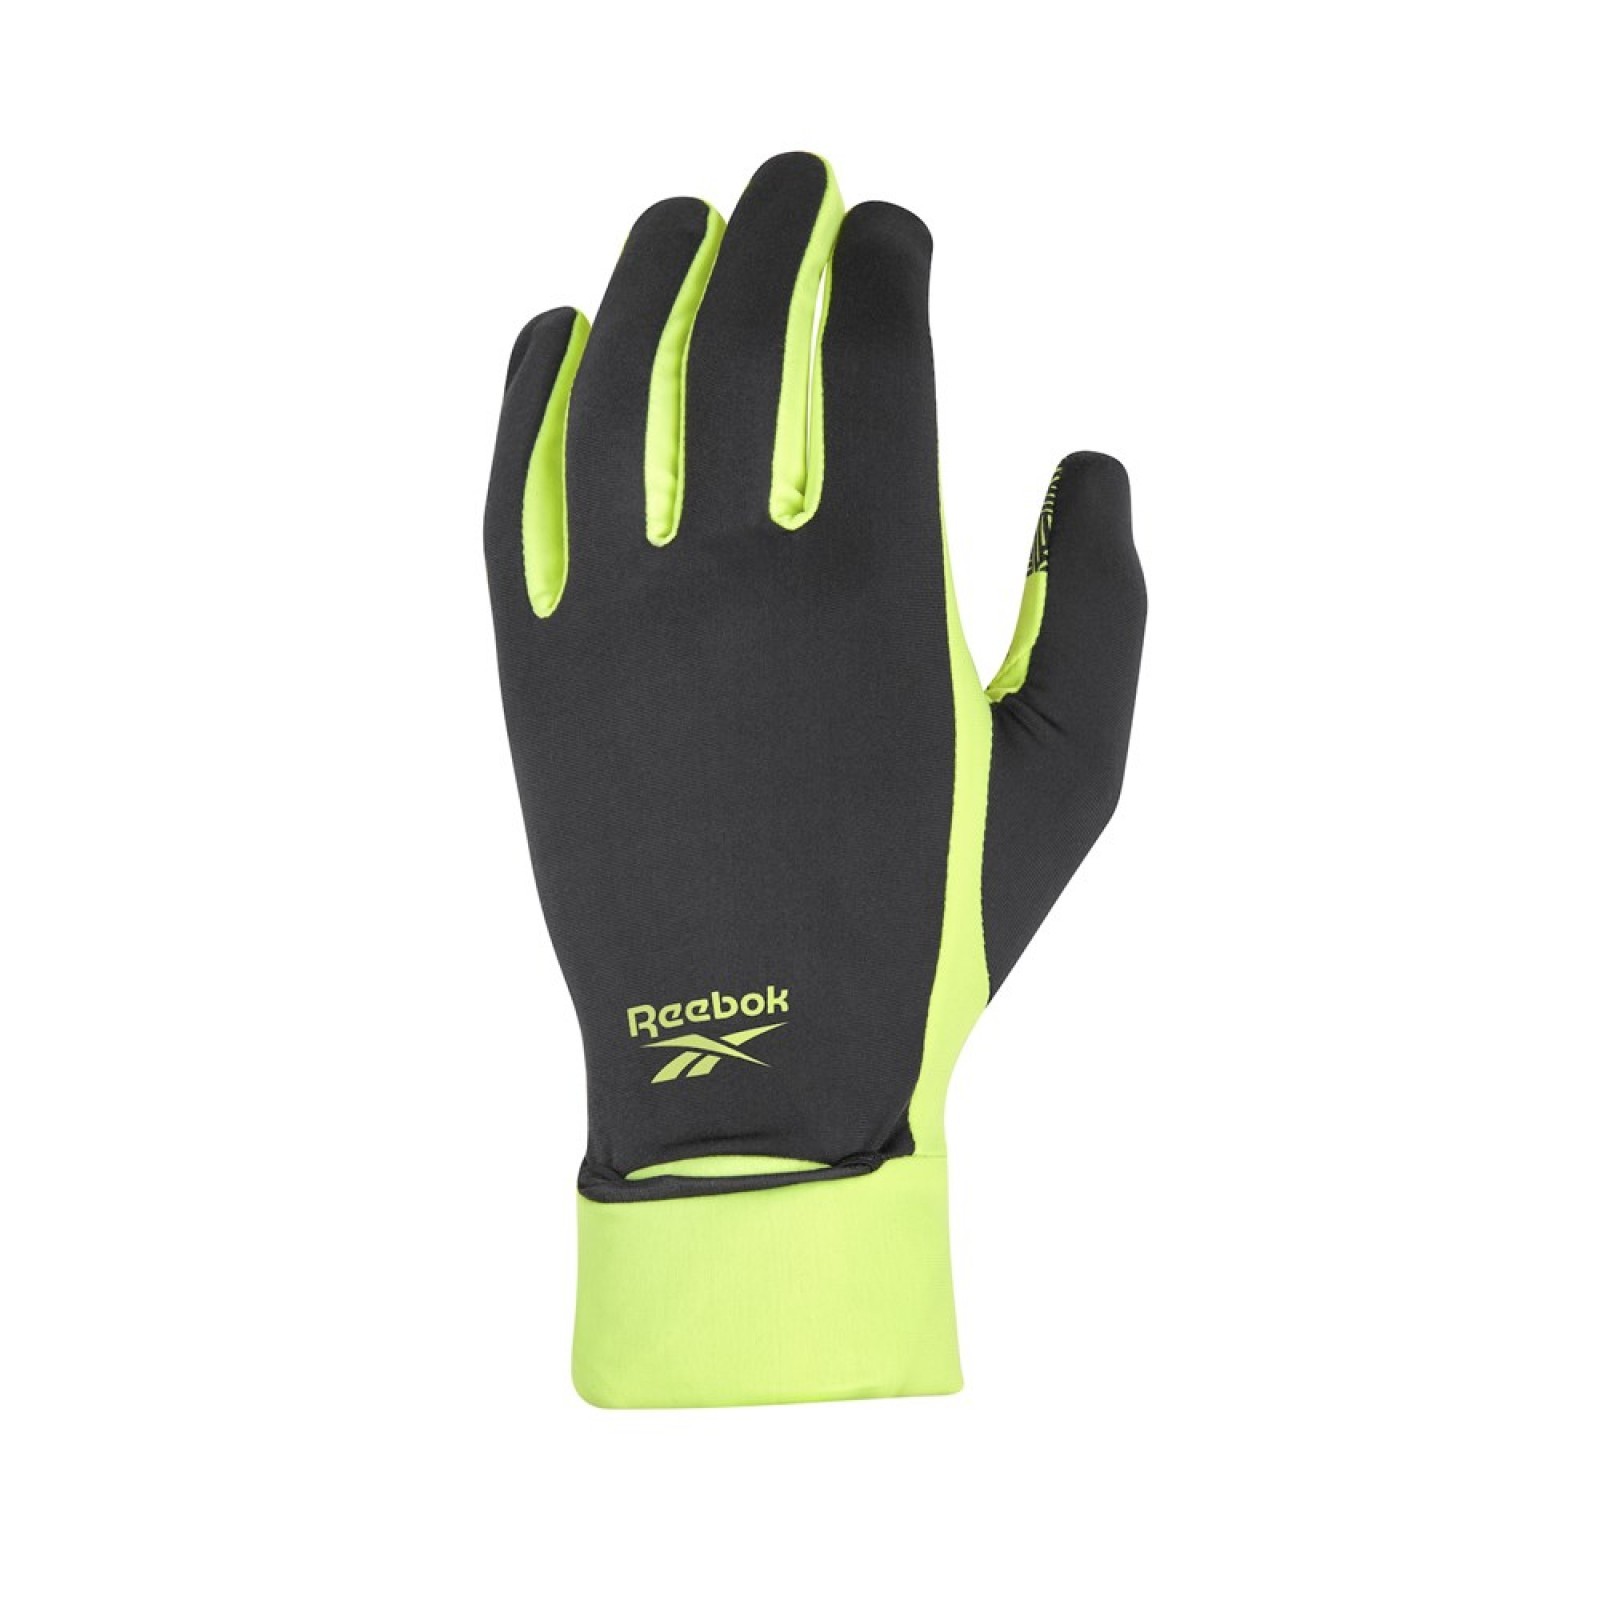 Reebok Running Thermal Gloves Great for Winter SIZE SMALL FREE UK POSTAGE 